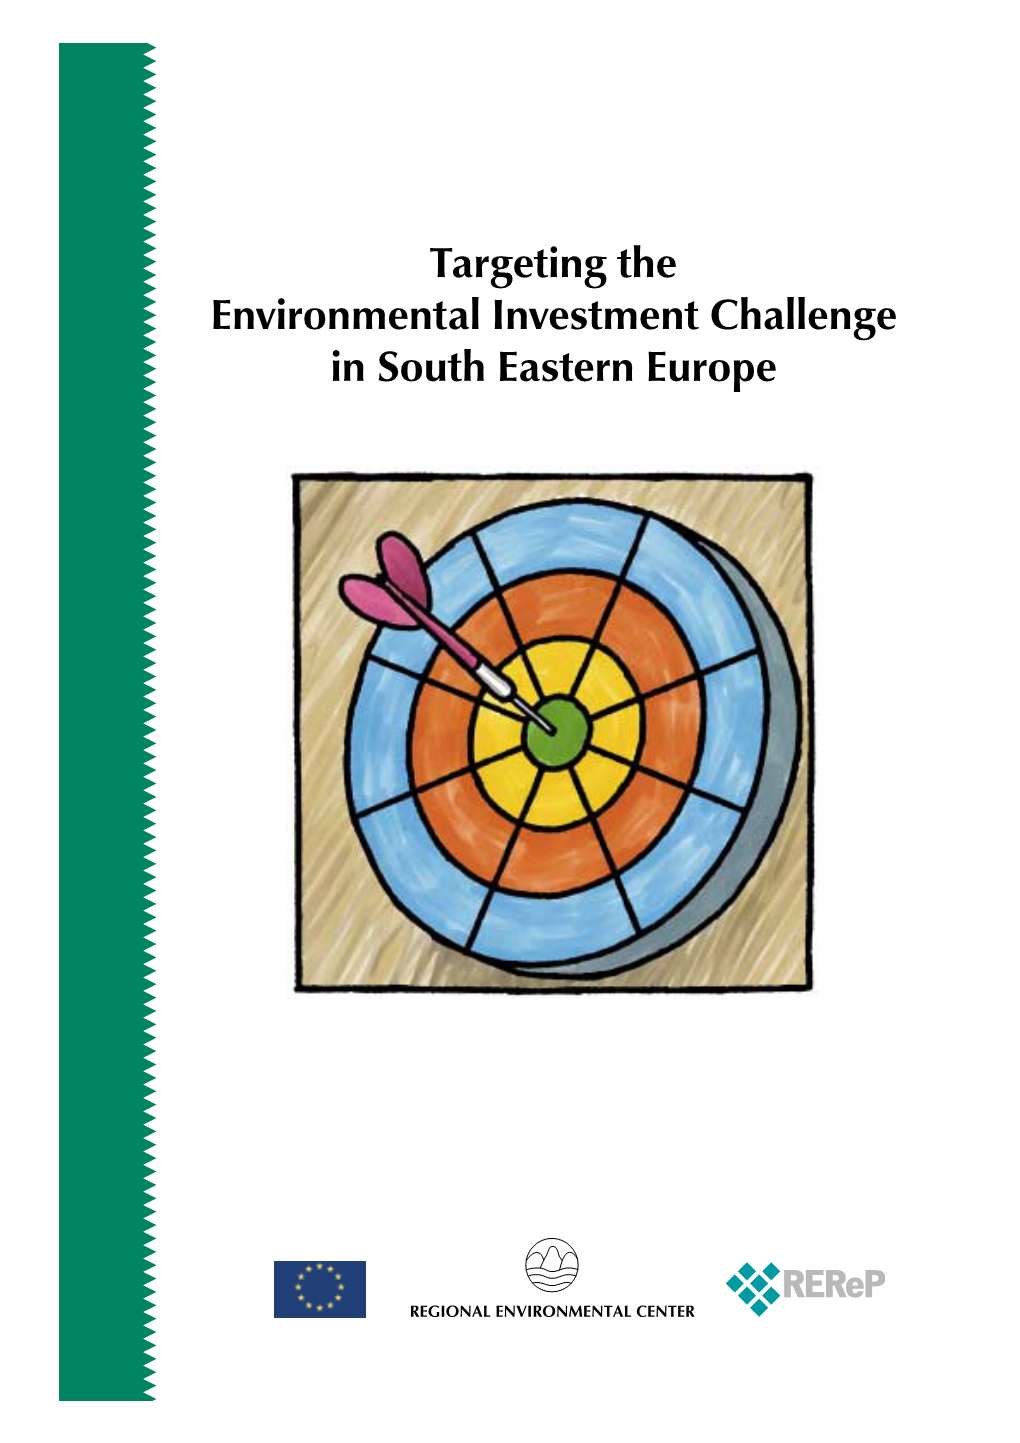 Targeting the Environmental Investment Challenge in South Eastern Europe